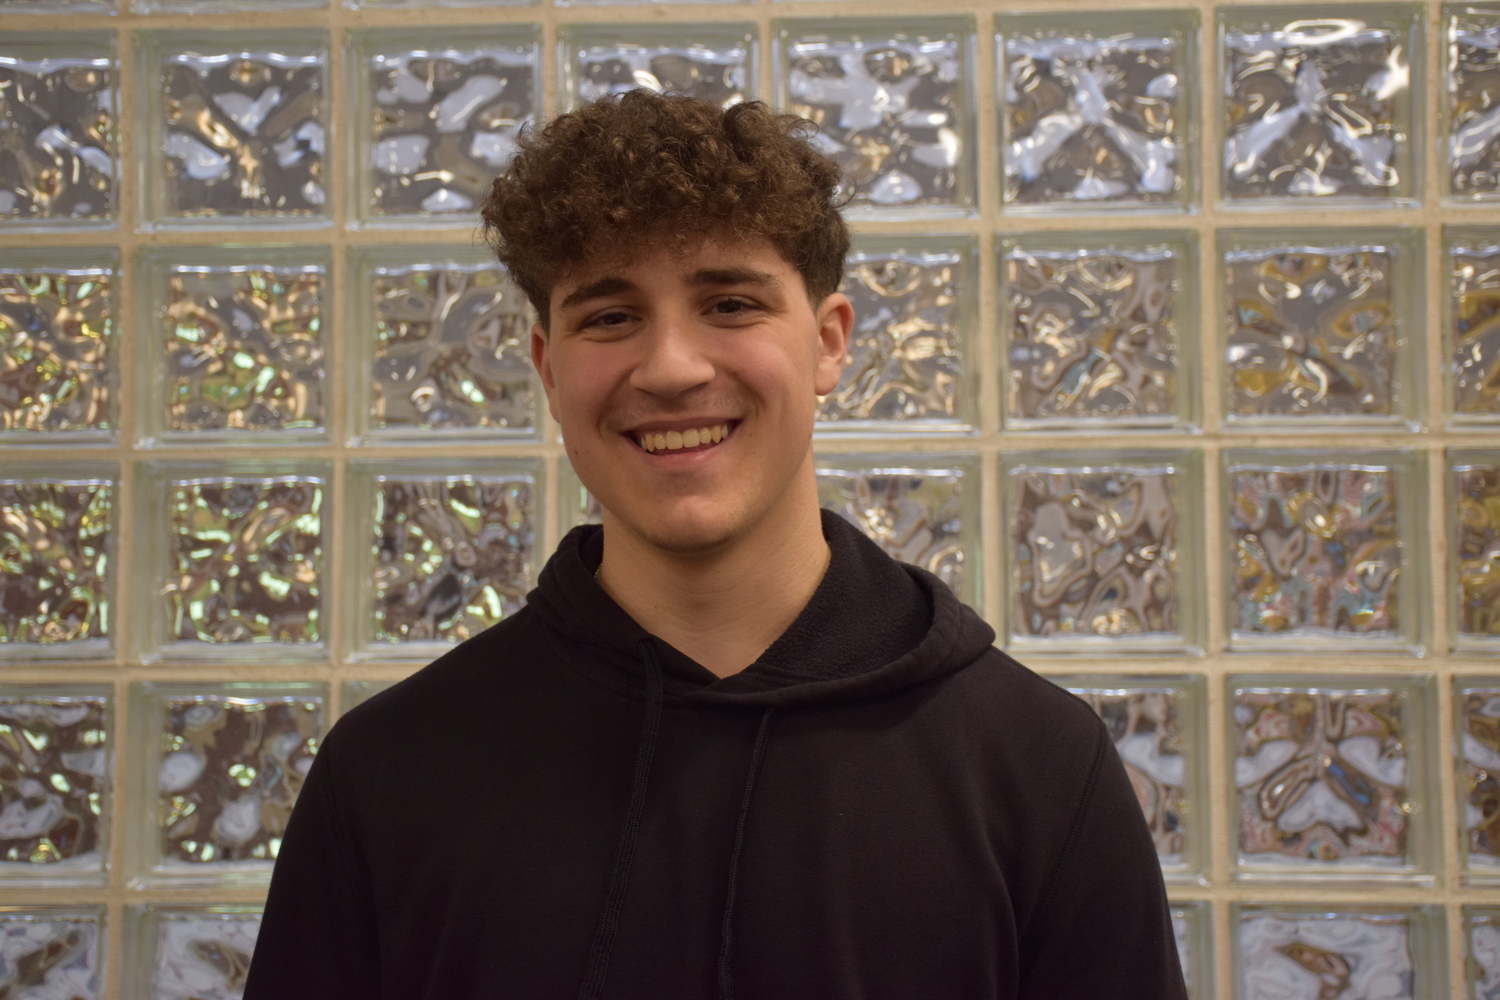 Eastport-South Manor Jr.-Sr. High School student Andrew Iannaccone was named an Employee of the Month for February by the BOCES Technical Center. COURTESY EASTPORT-SOUTH MANOR SCHOOL DISTRICT